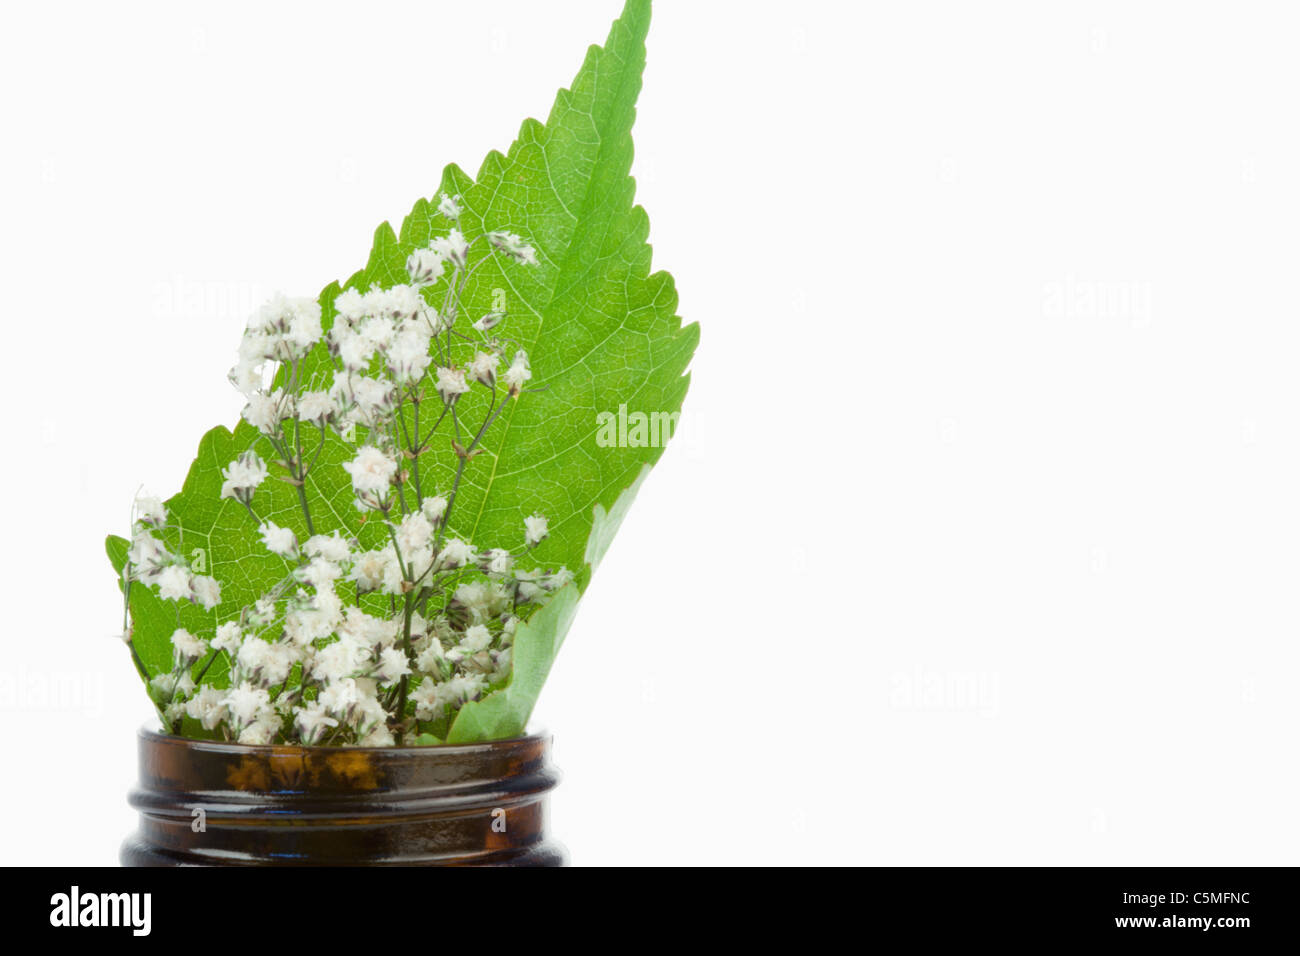 Leaf and flowers in a small bottle Stock Photo